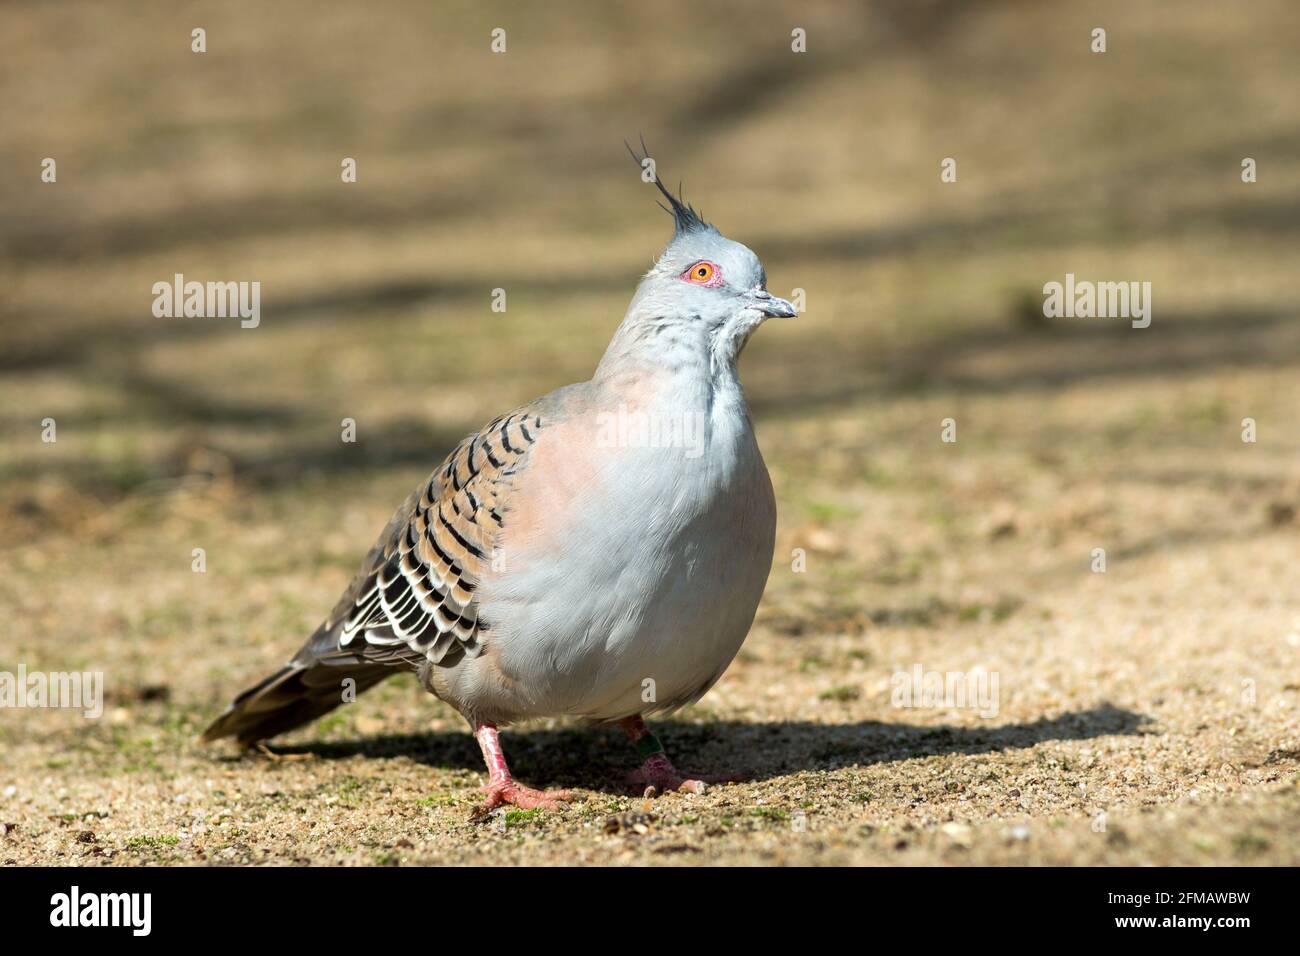 The shorthaired pigeon, also known as the Australian crested pigeon, Ocyphaps lophotes, is a species of pigeon native to Australia. Stock Photo